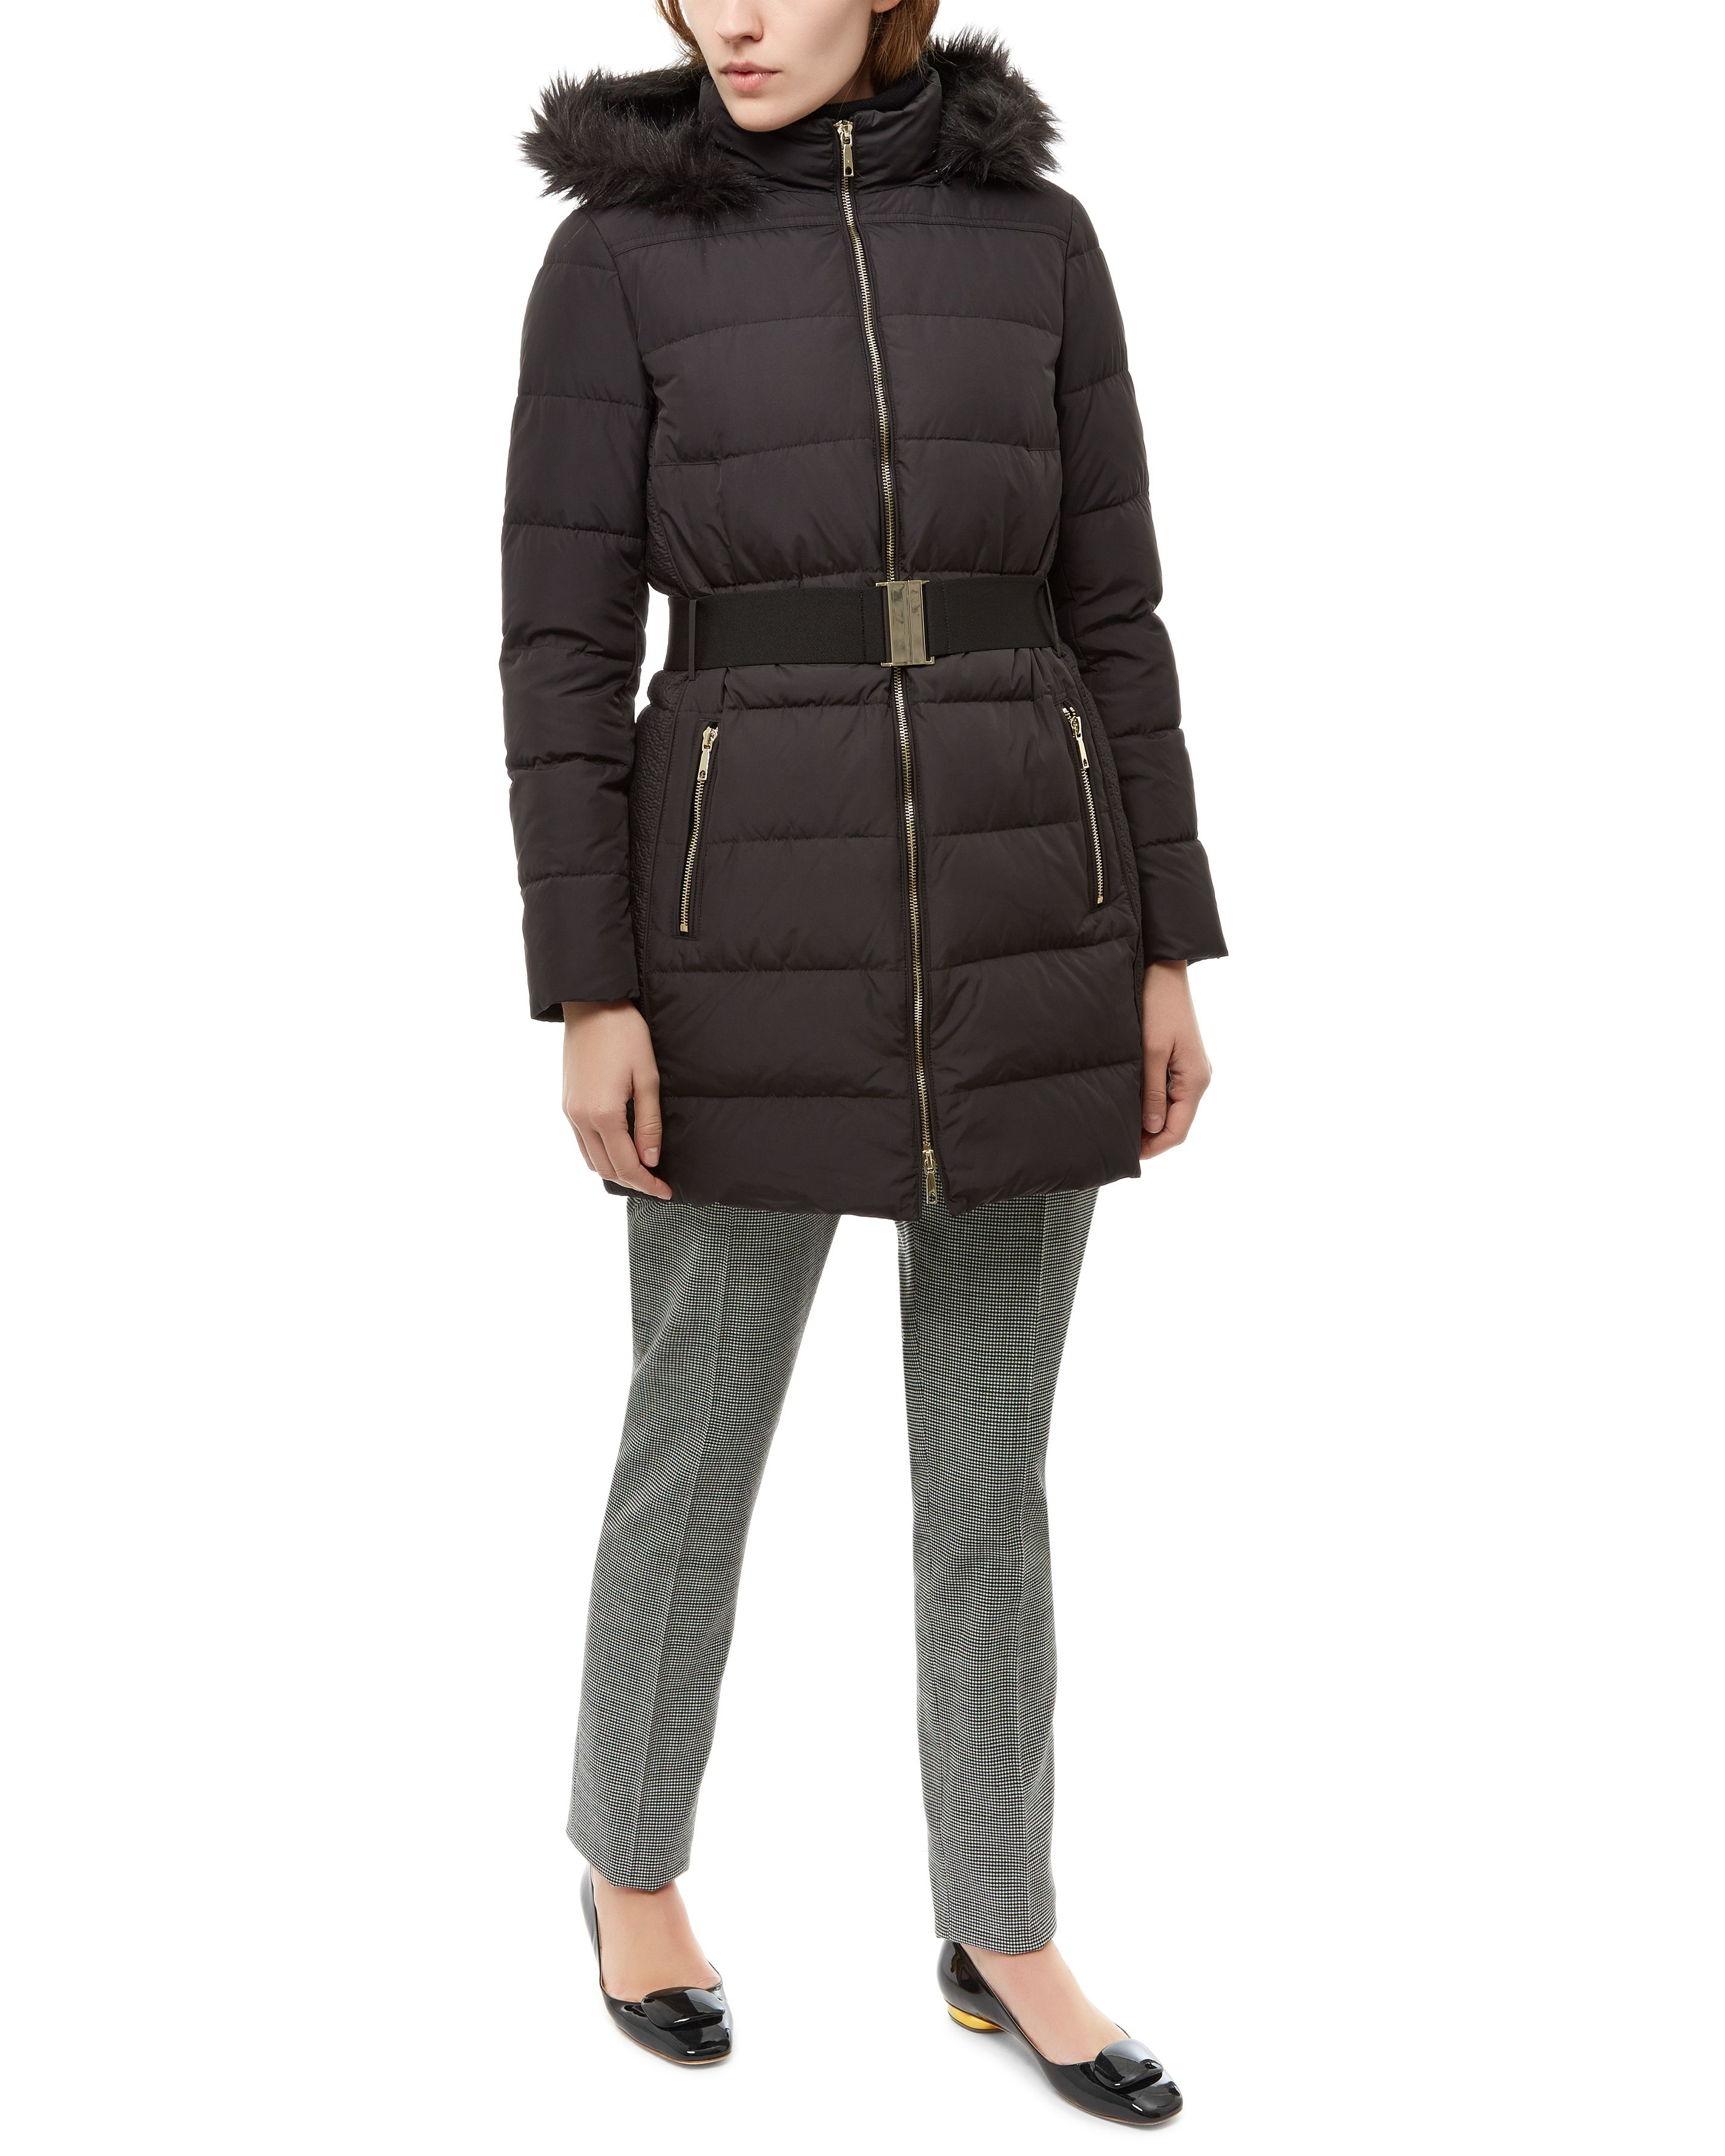 Jaeger Waisted Long Puffer Jacket in Black | Lyst